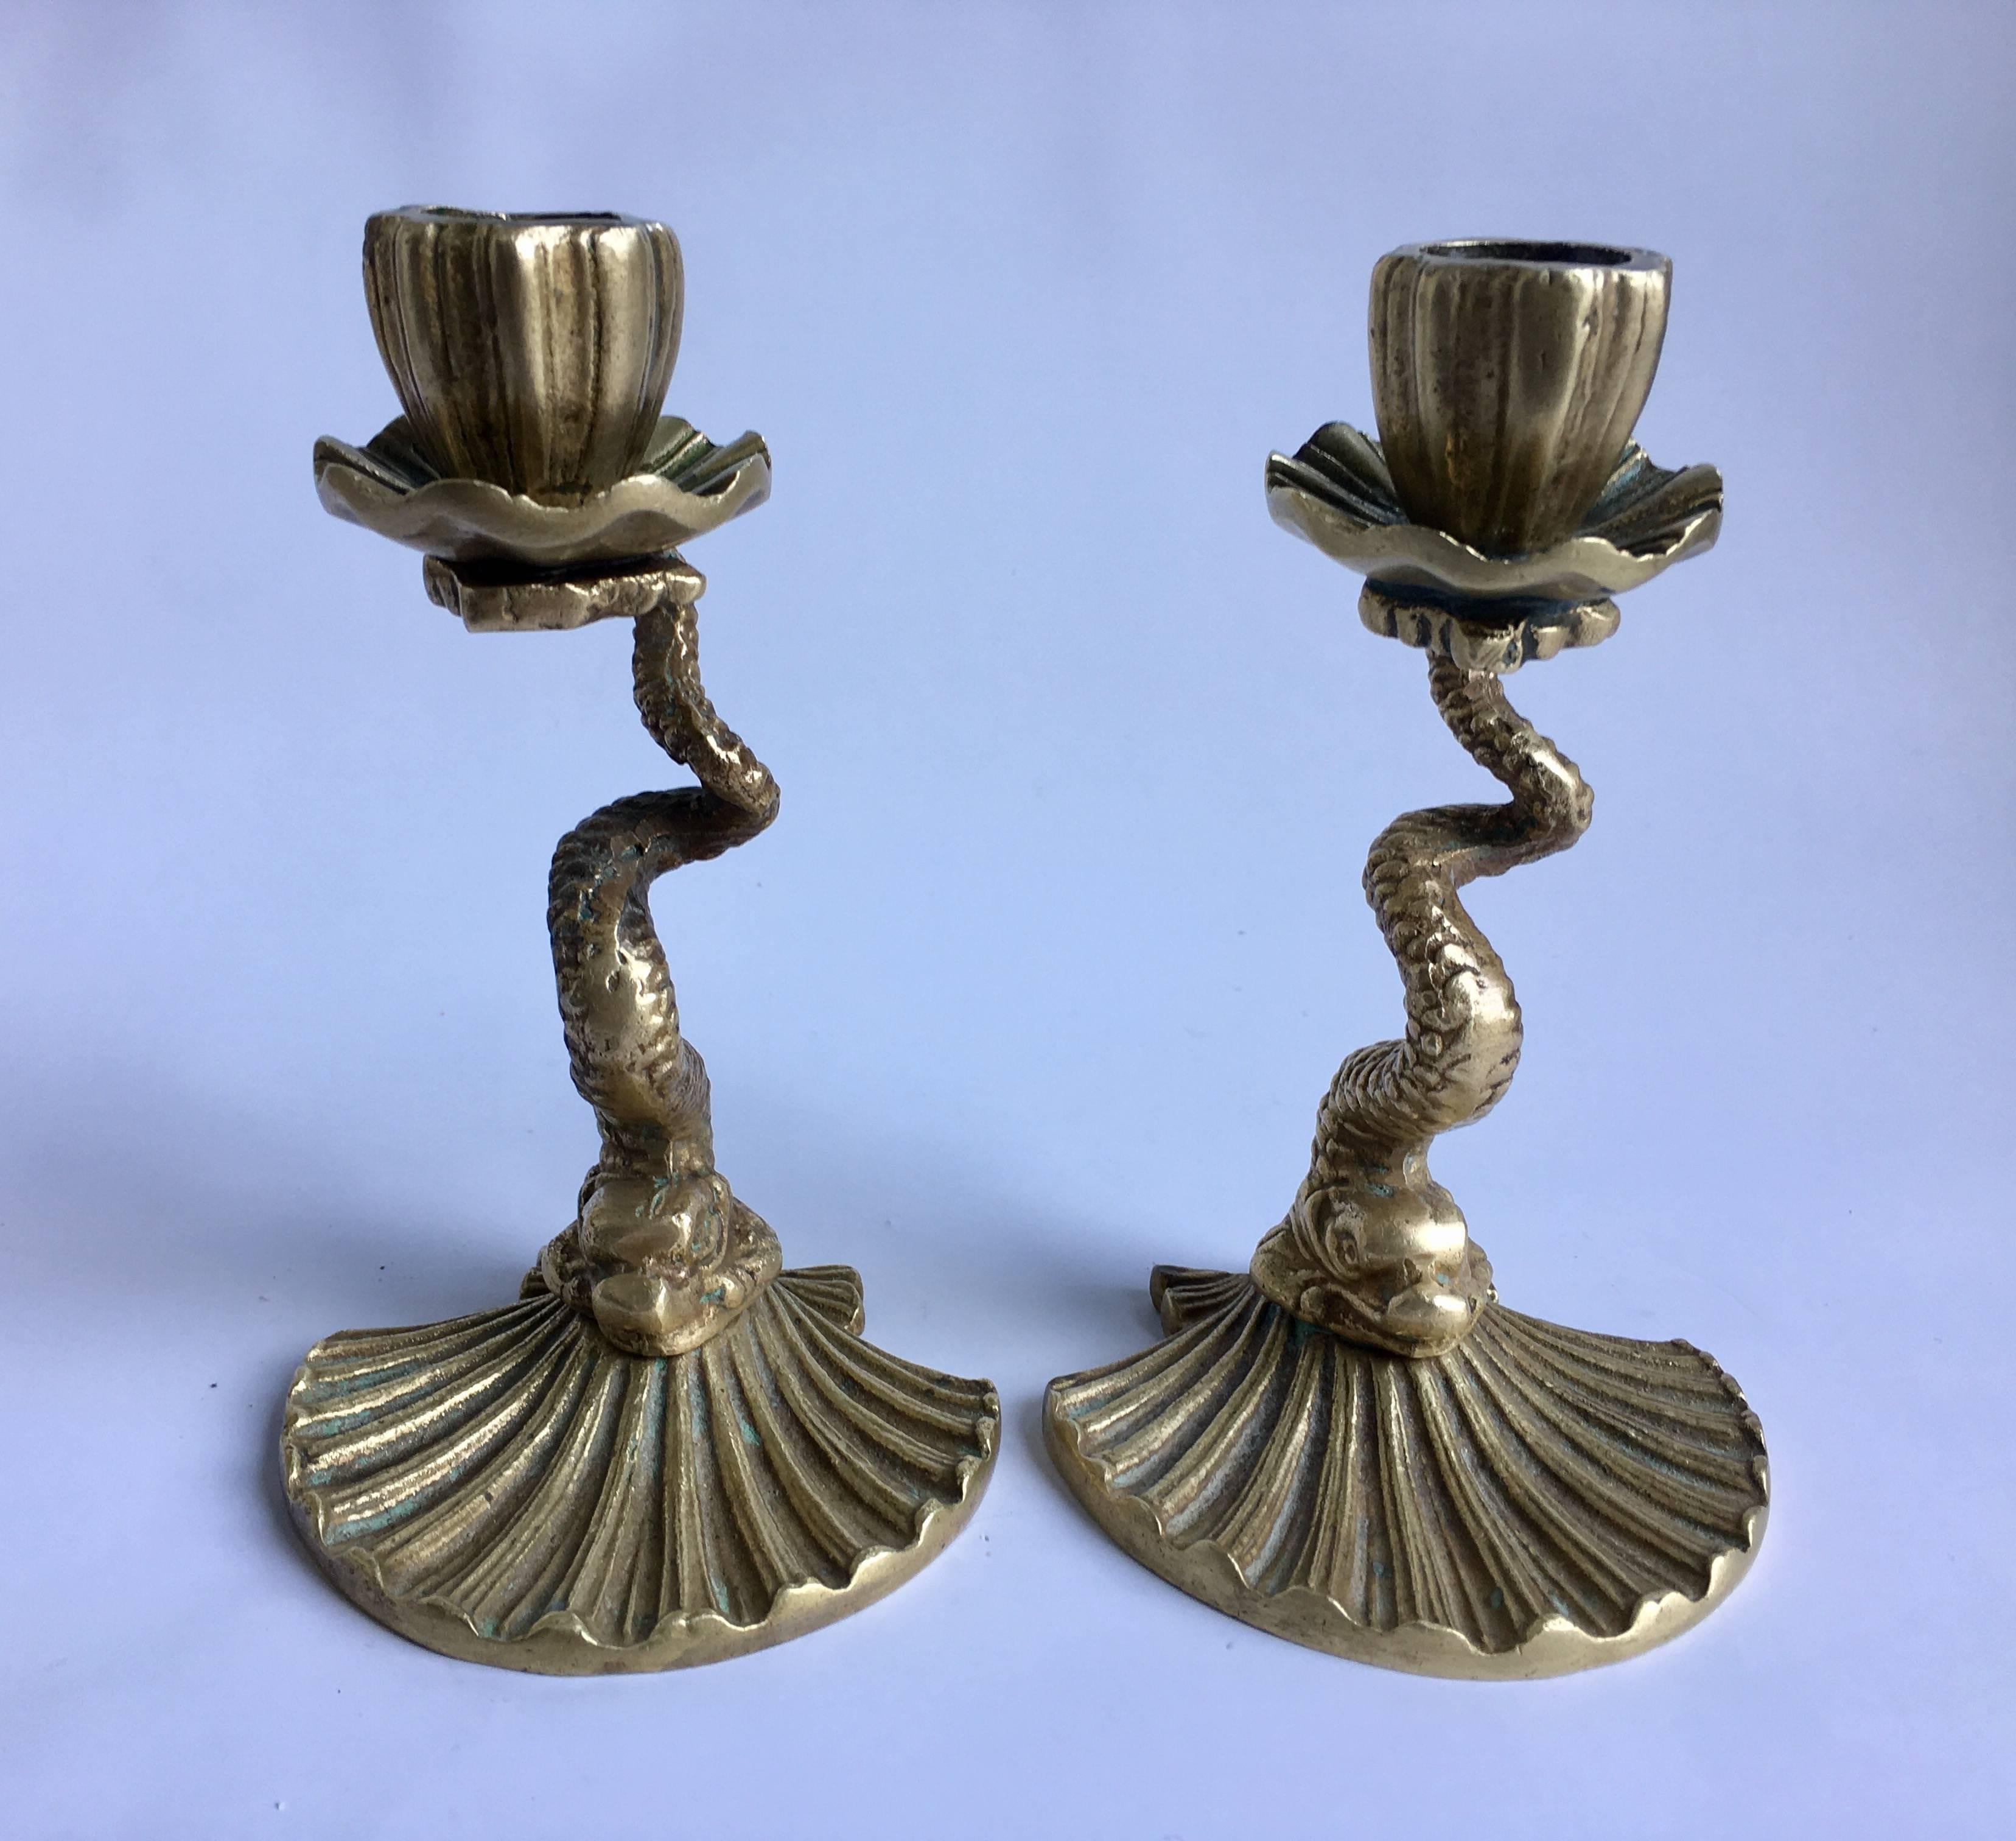 Mid-Century koi fish/serpent brass figurative candlesticks by Arthur Court. These Asian inspired sculptural curved candlesticks feature a dolphin-like creature mounted on a shell form base. Stamped and dated 1979 on bottom.